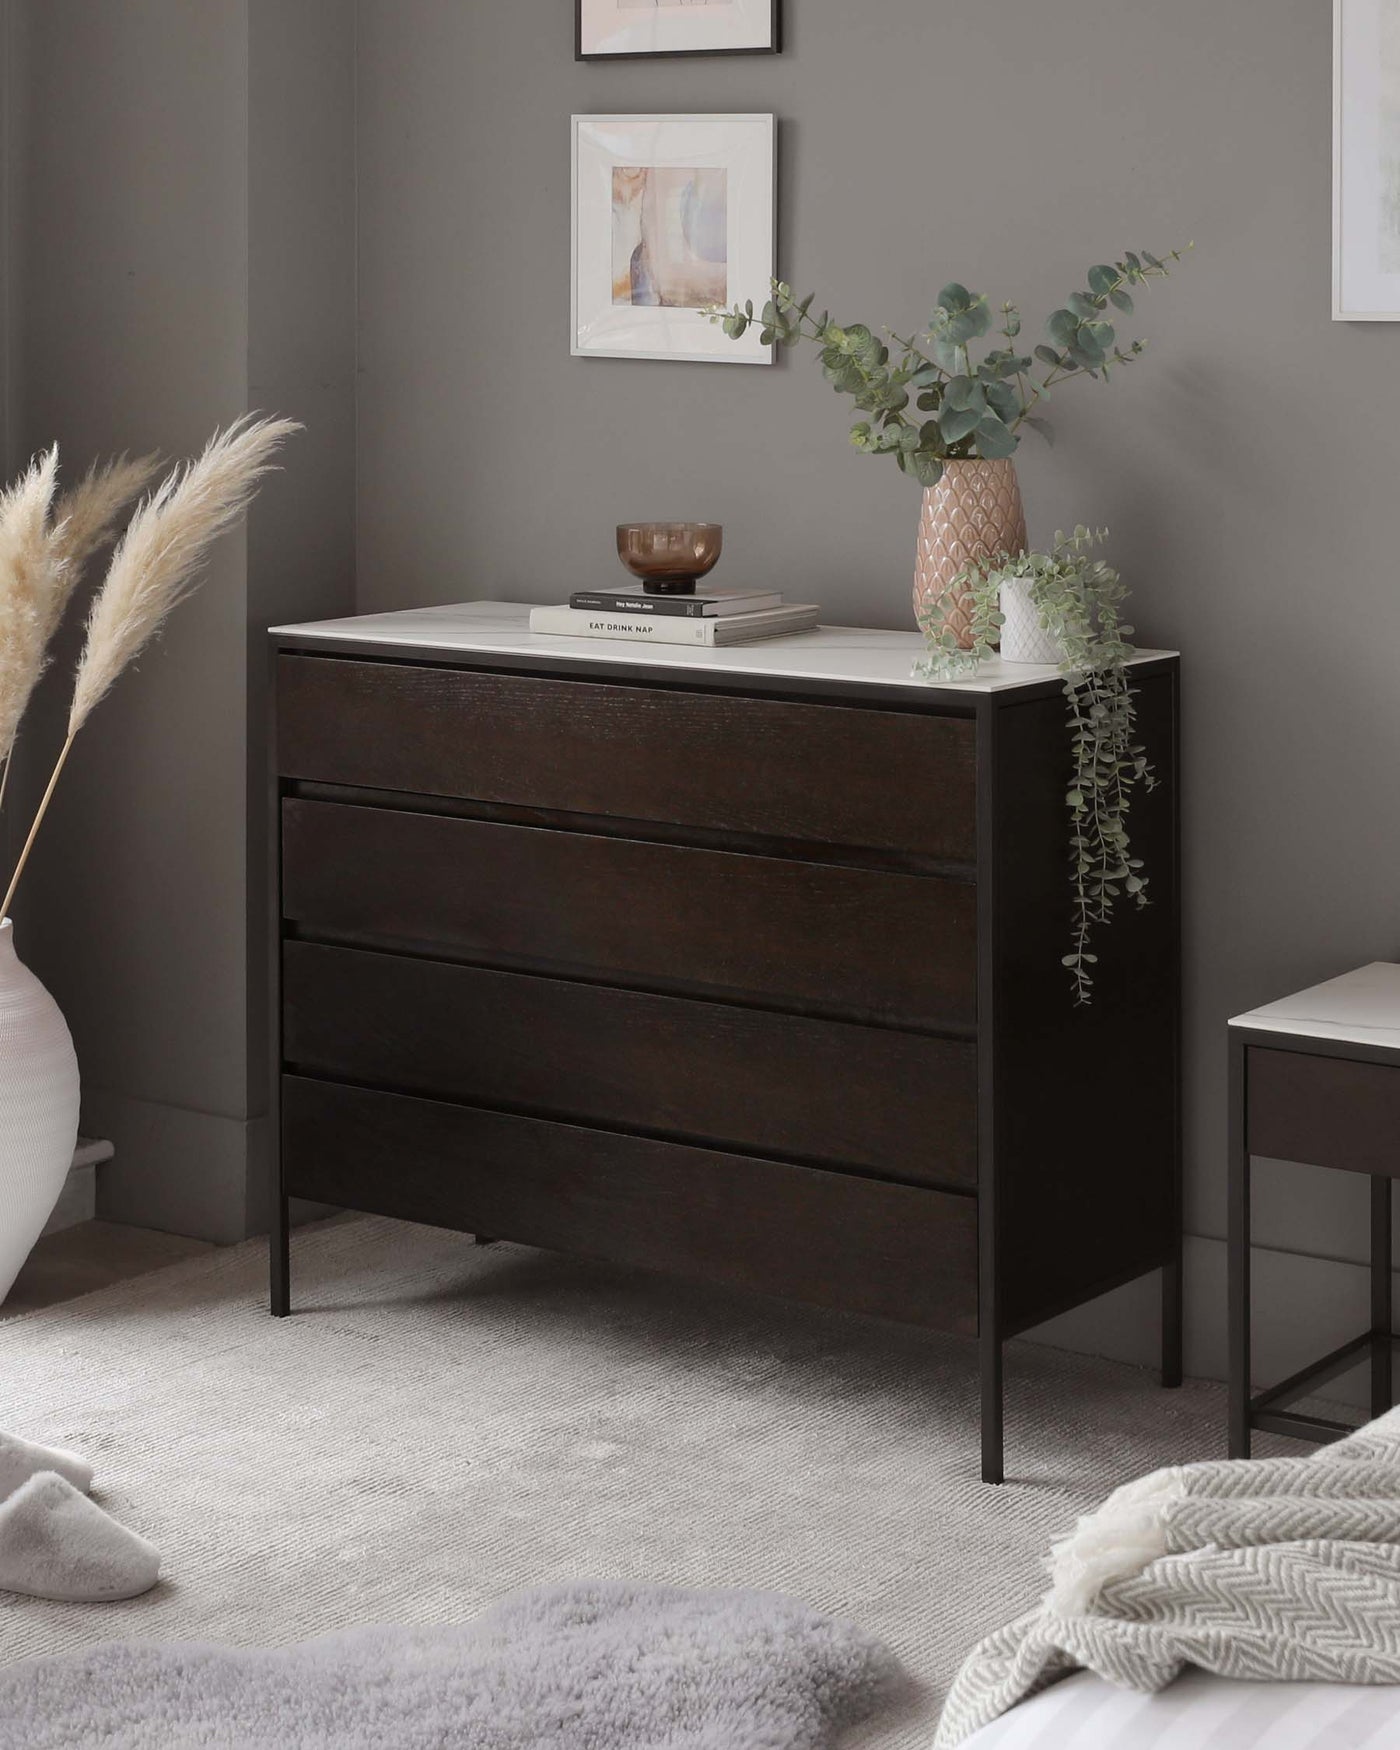 Modern espresso brown three-drawer dresser with a minimalist design and sleek black metal handles, complemented by a small, square black side table with a simple frame structure.